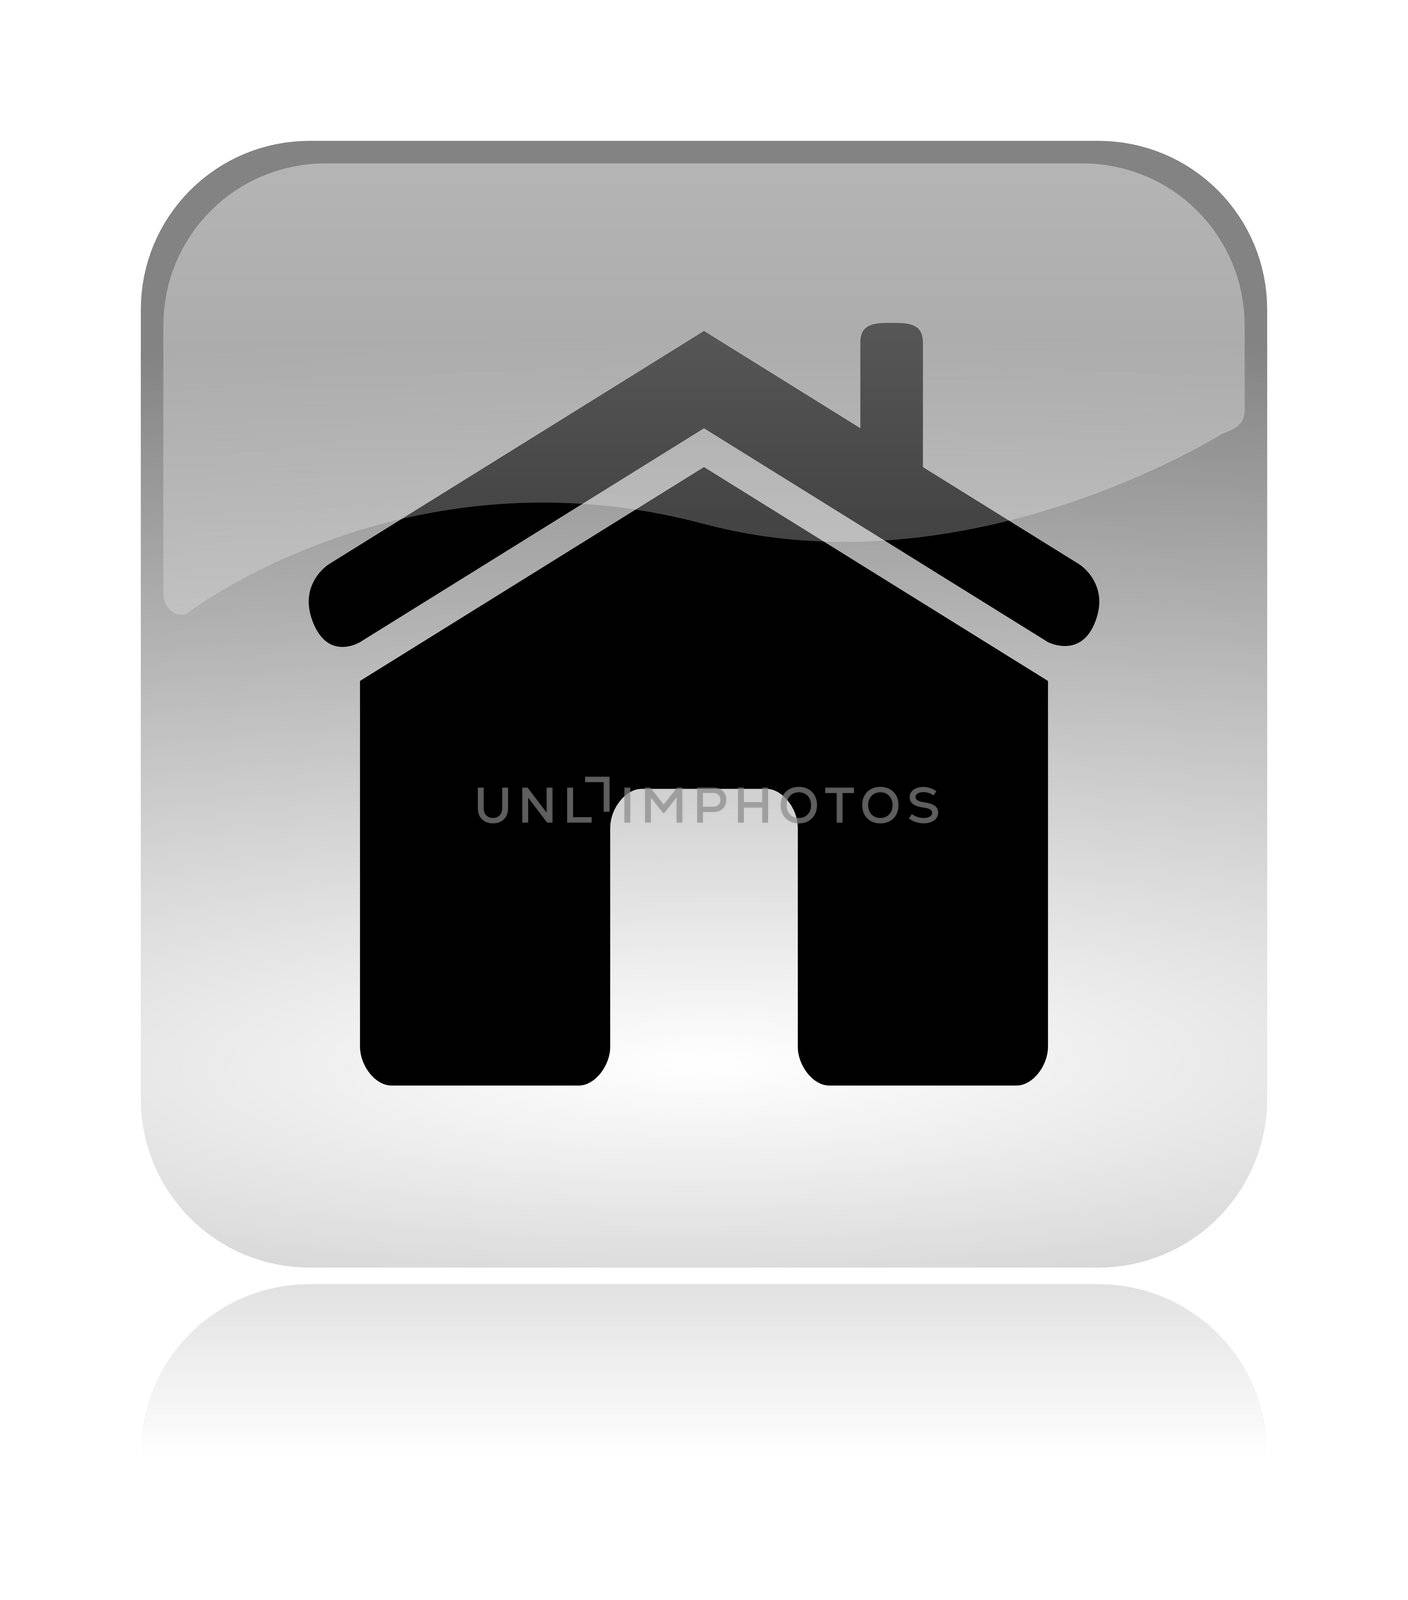 Home white, transparent and glossy web interface icon with reflection